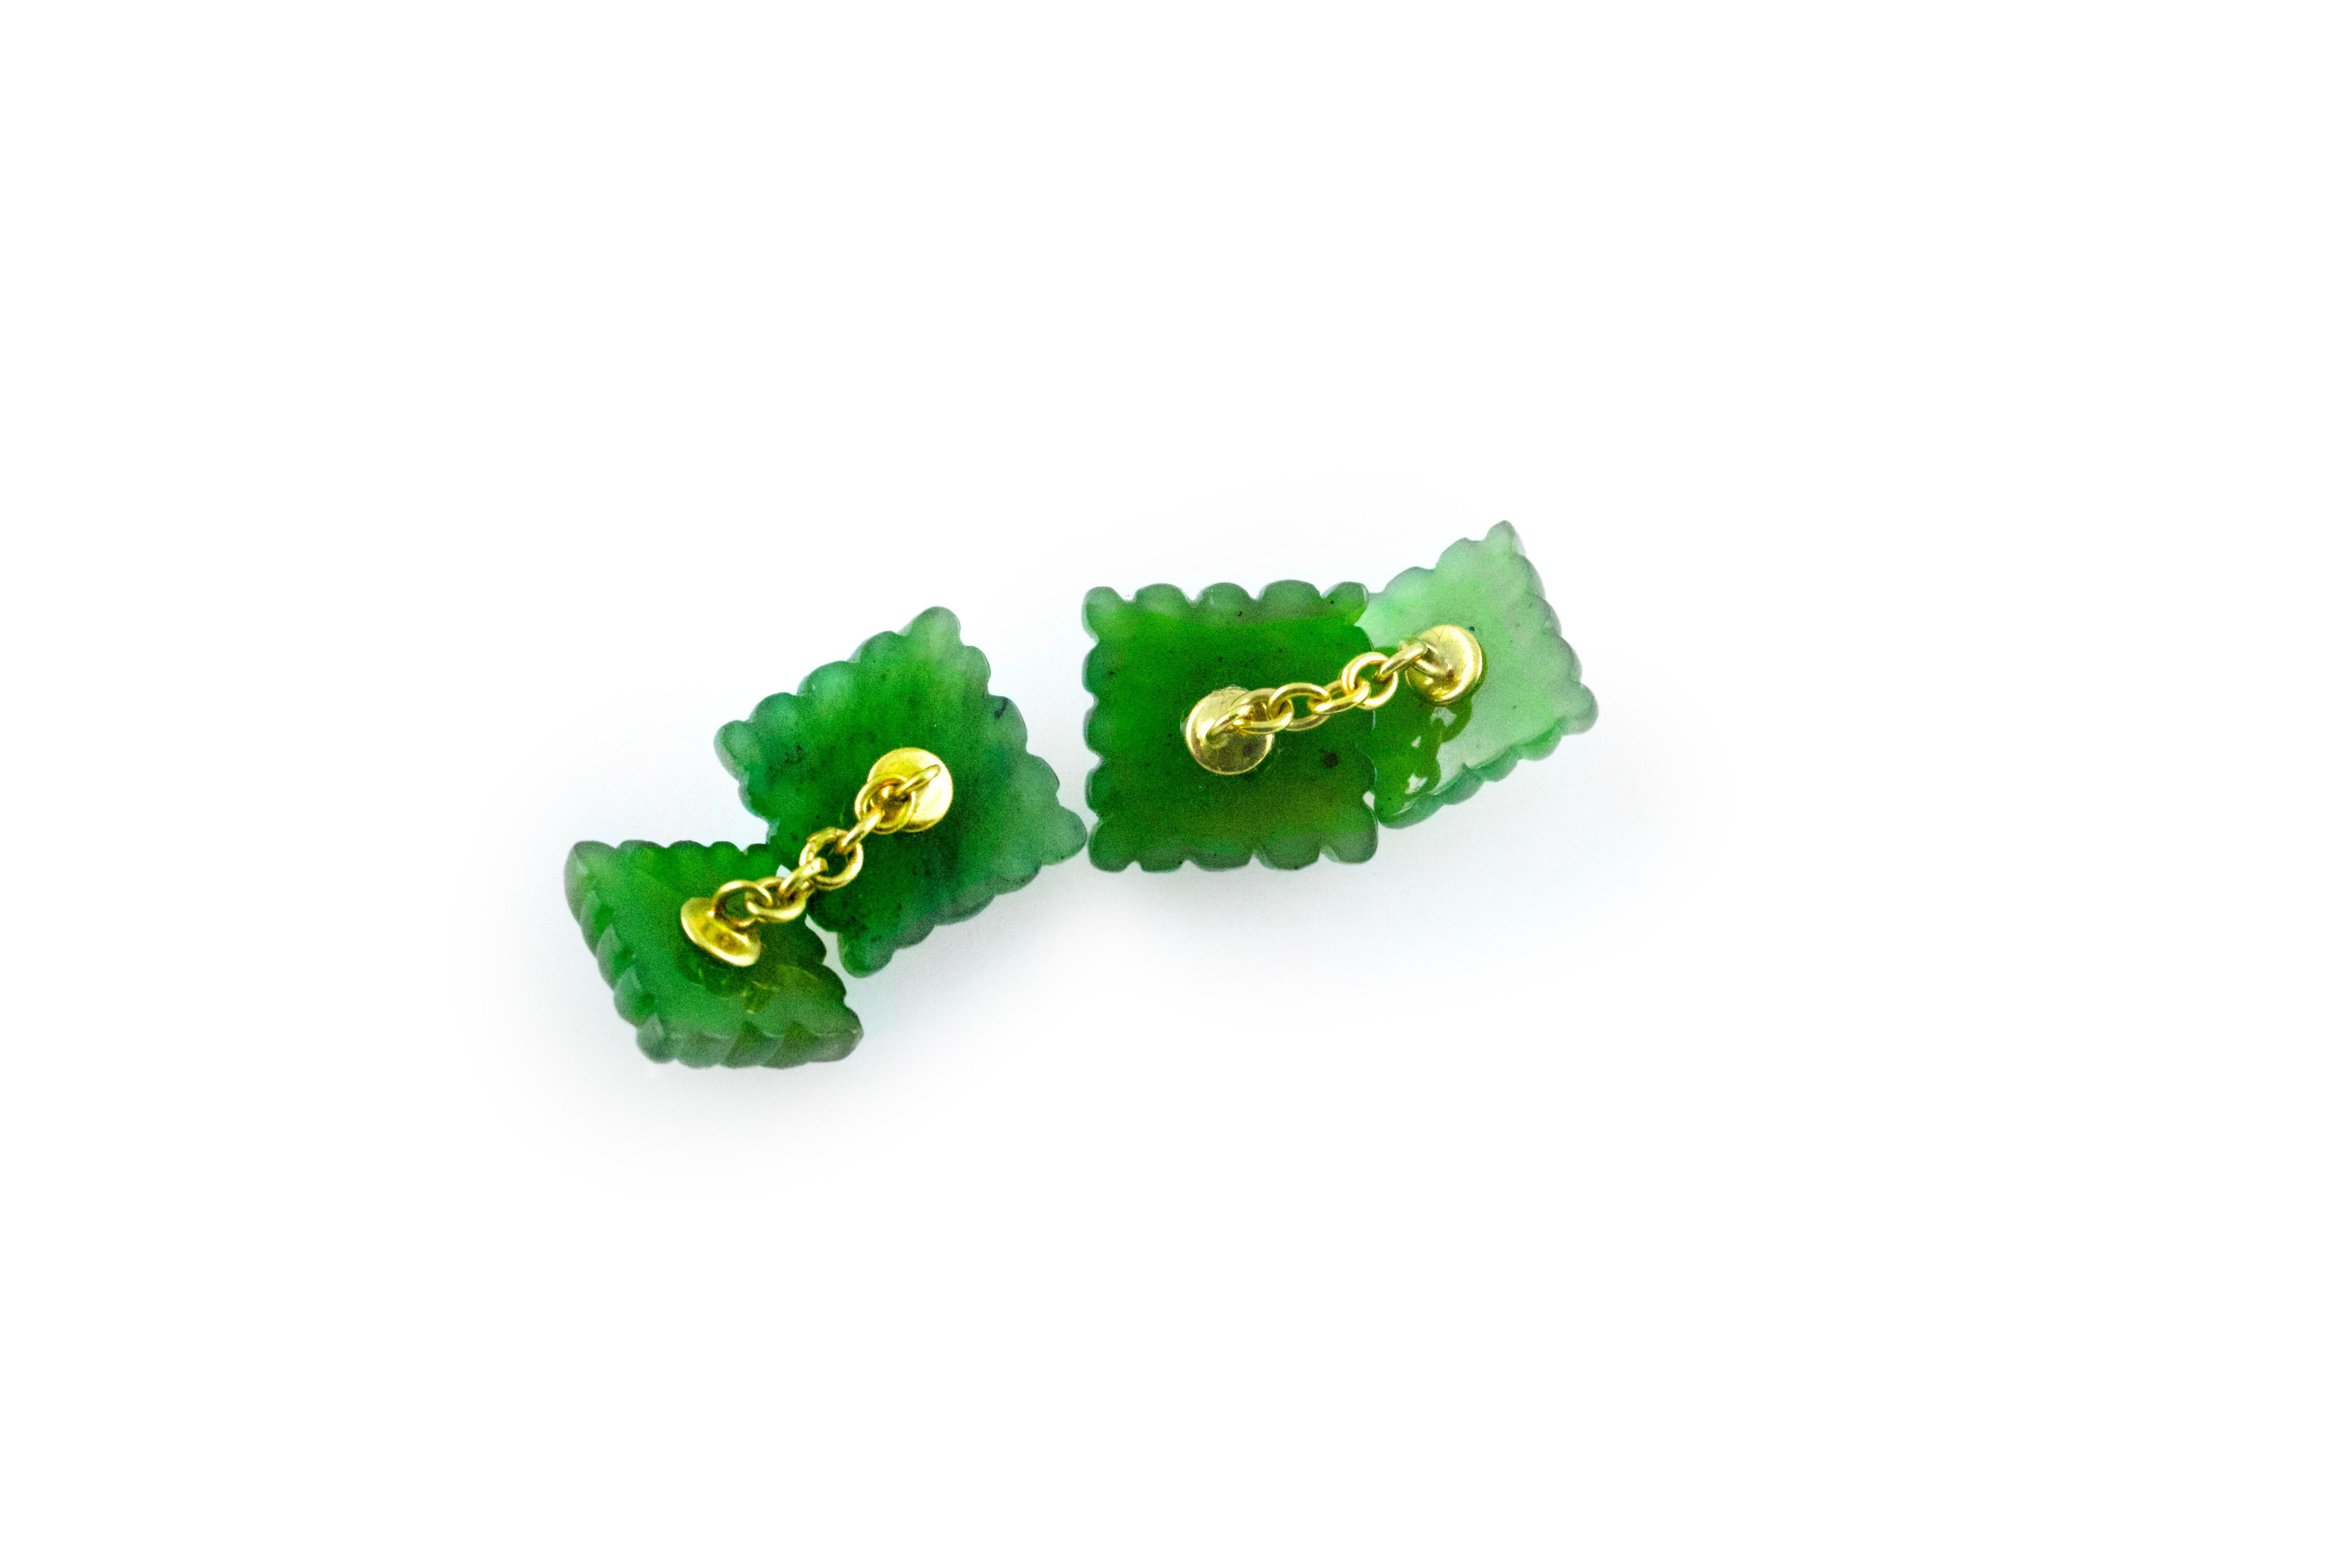 Contemporary 18 Karat Yellow Gold Carved Squared Jade and Rubies Cufflinks